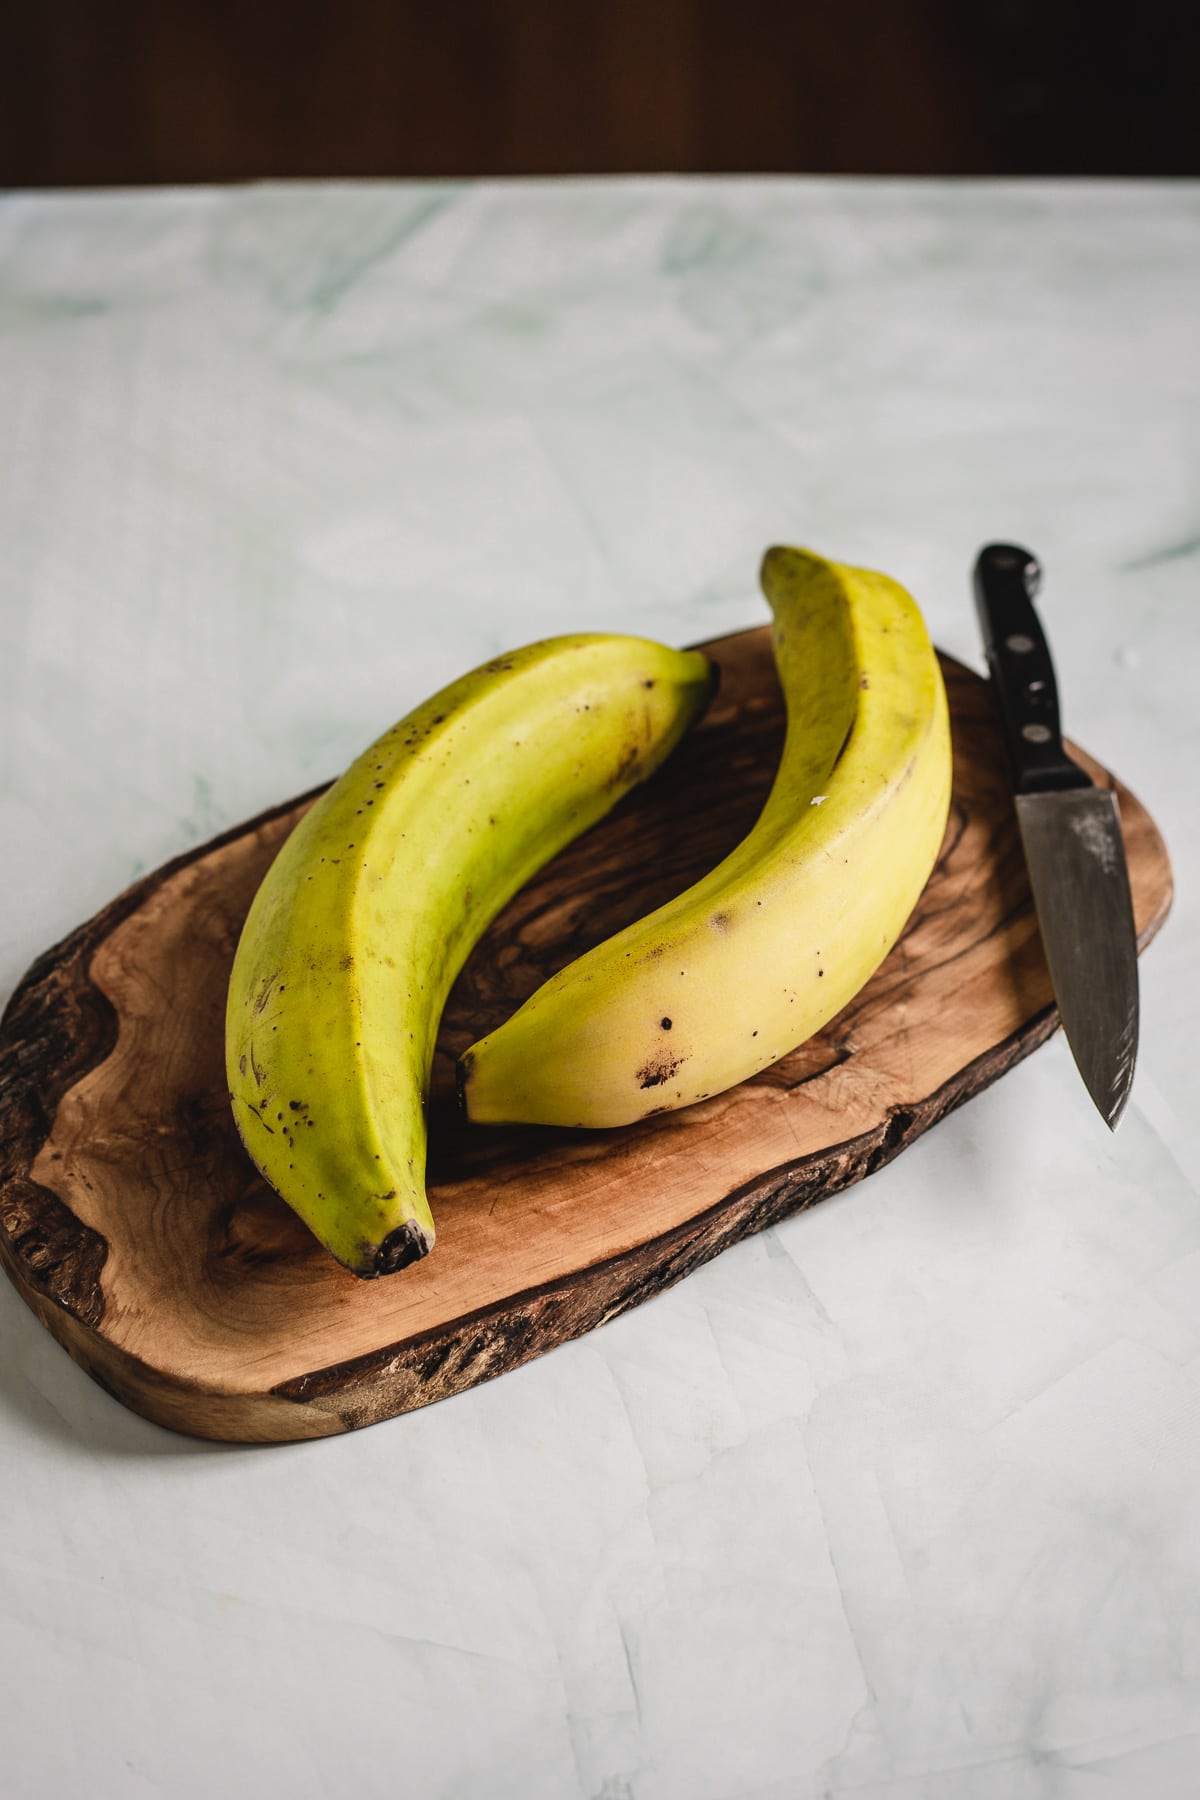 Two traditional Colombian Patacones on a wooden cutting board next to a knife.